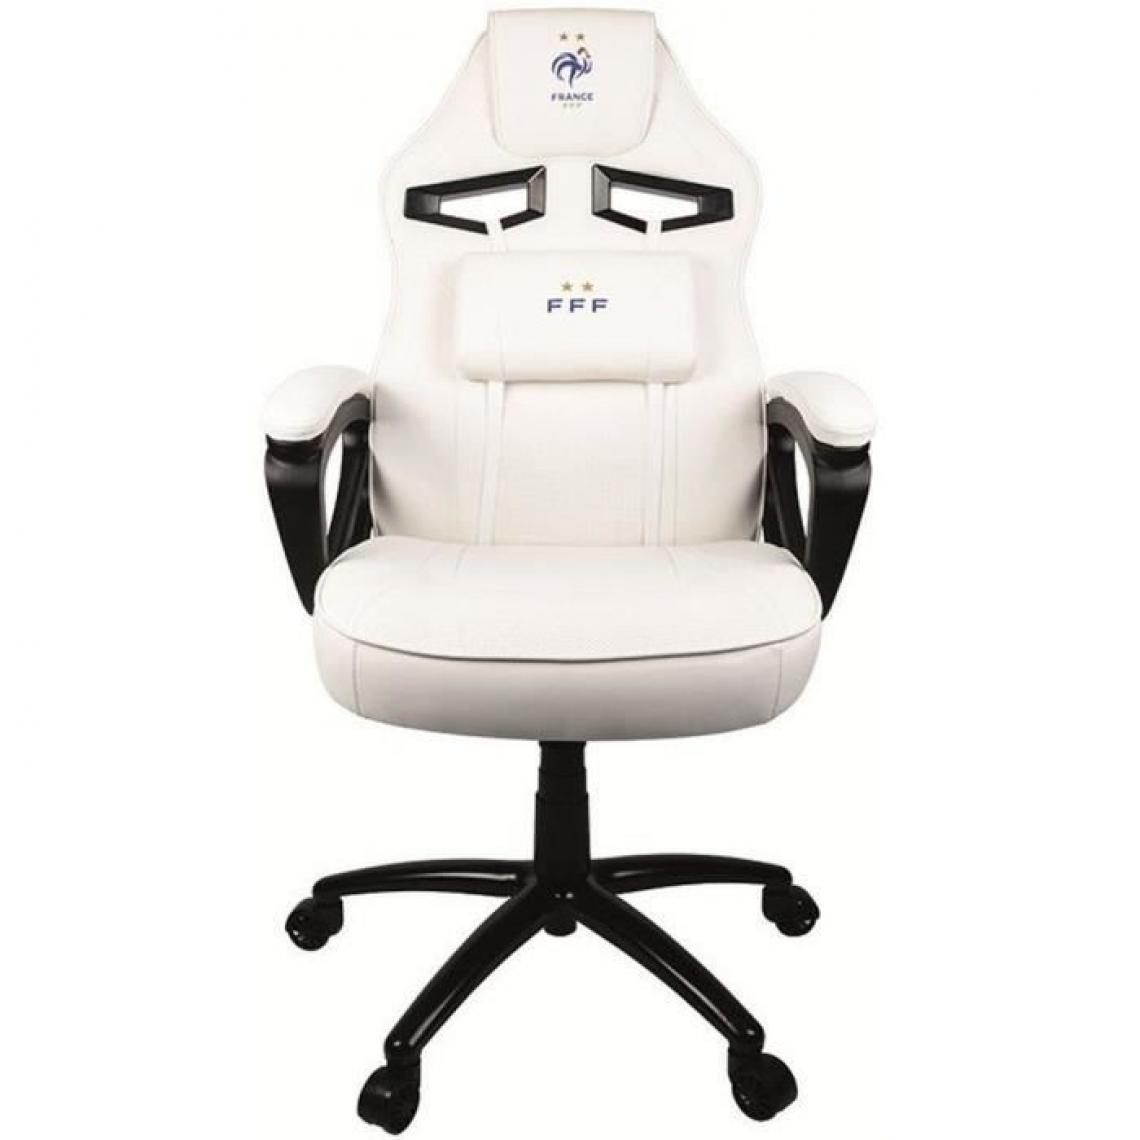 Konix - Siege Gaming - KONIX - Blanc - Sous Licence Officielle FFF - Chaise gamer